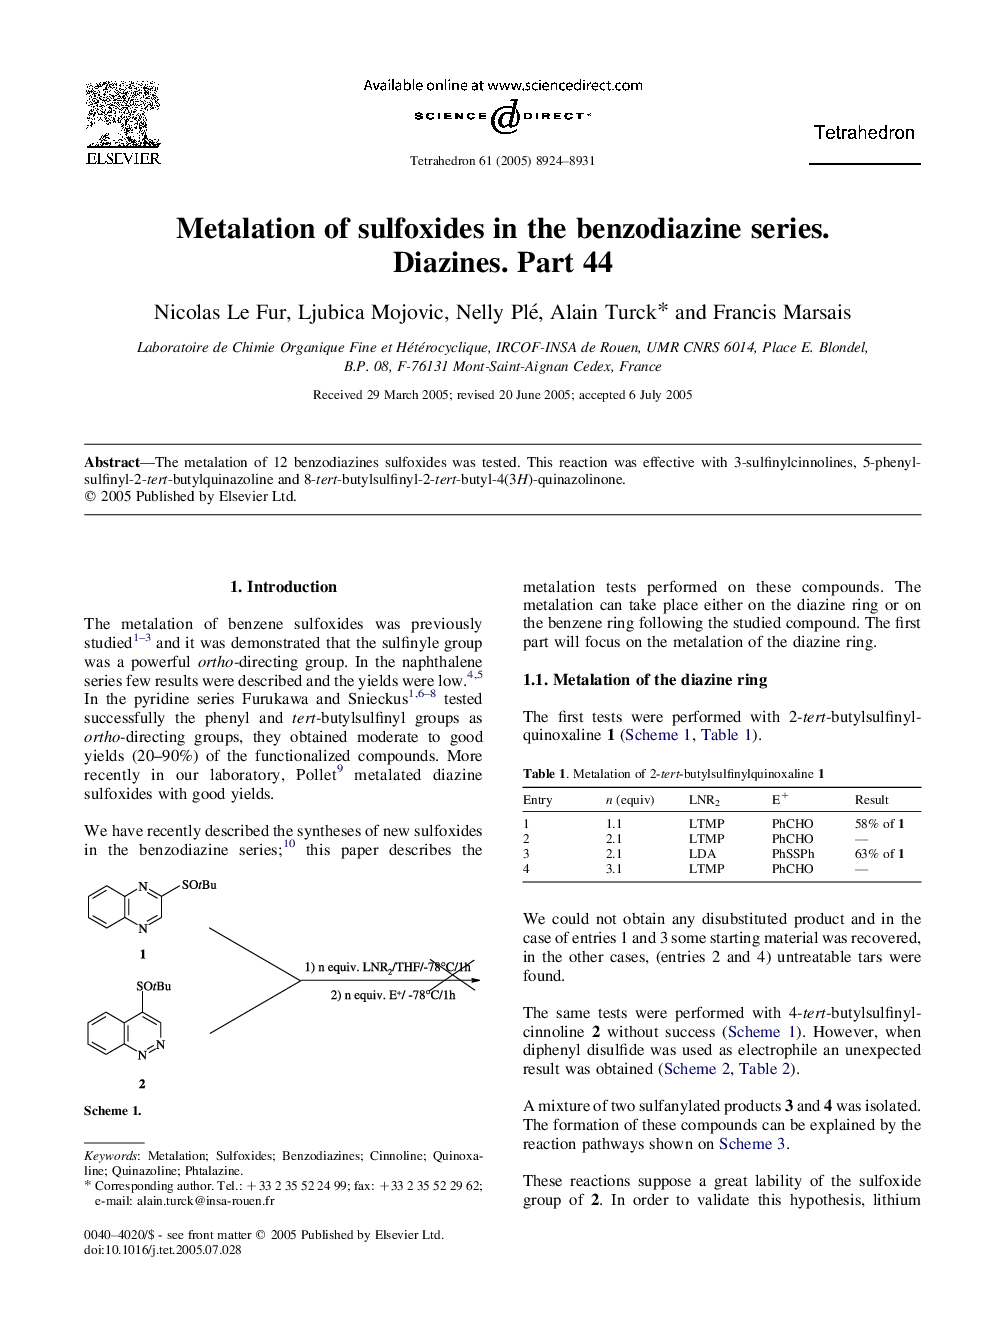 Metalation of sulfoxides in the benzodiazine series. Diazines. Part 44